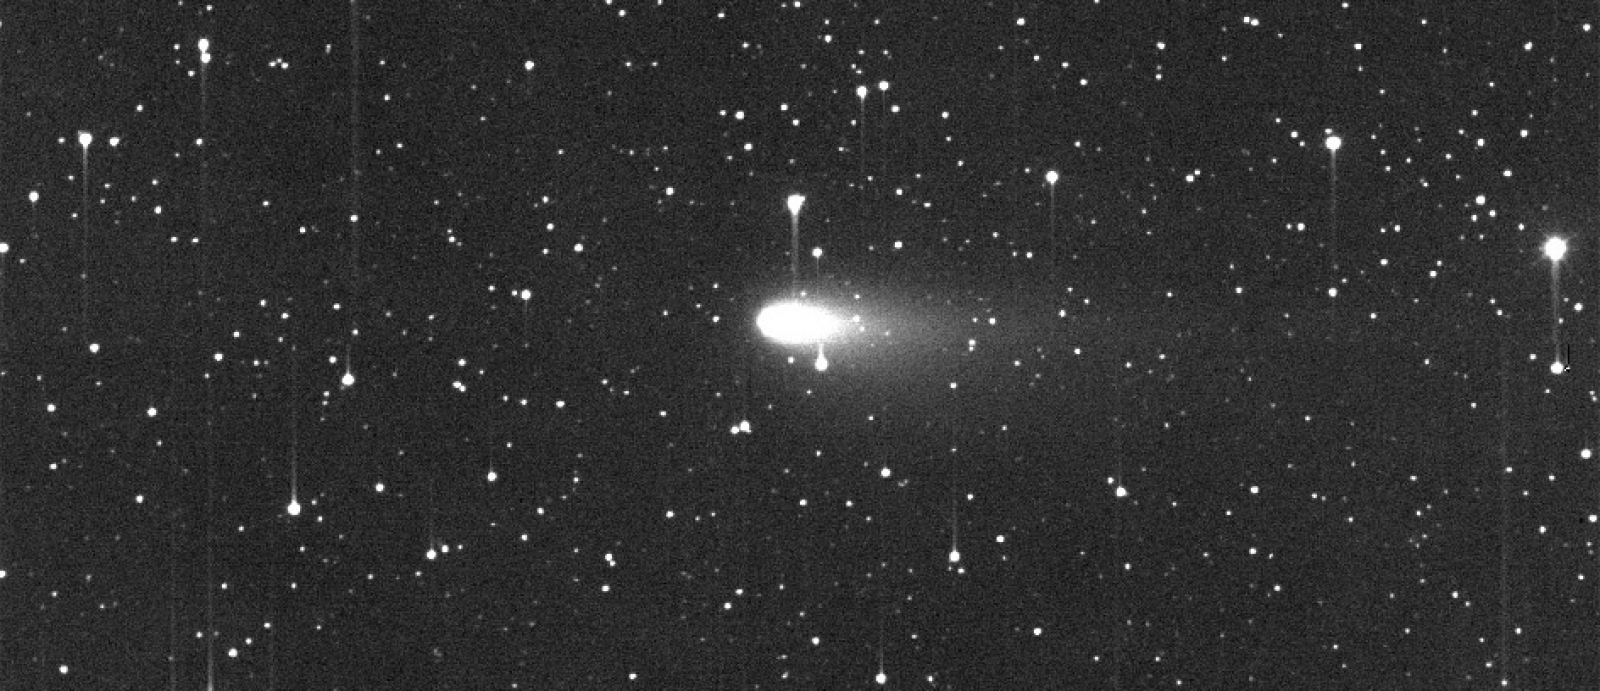 An image of comet C/1999 S4 LINEAR taken by one of the LINEAR telescopes shows a characteristic well-developed tail.